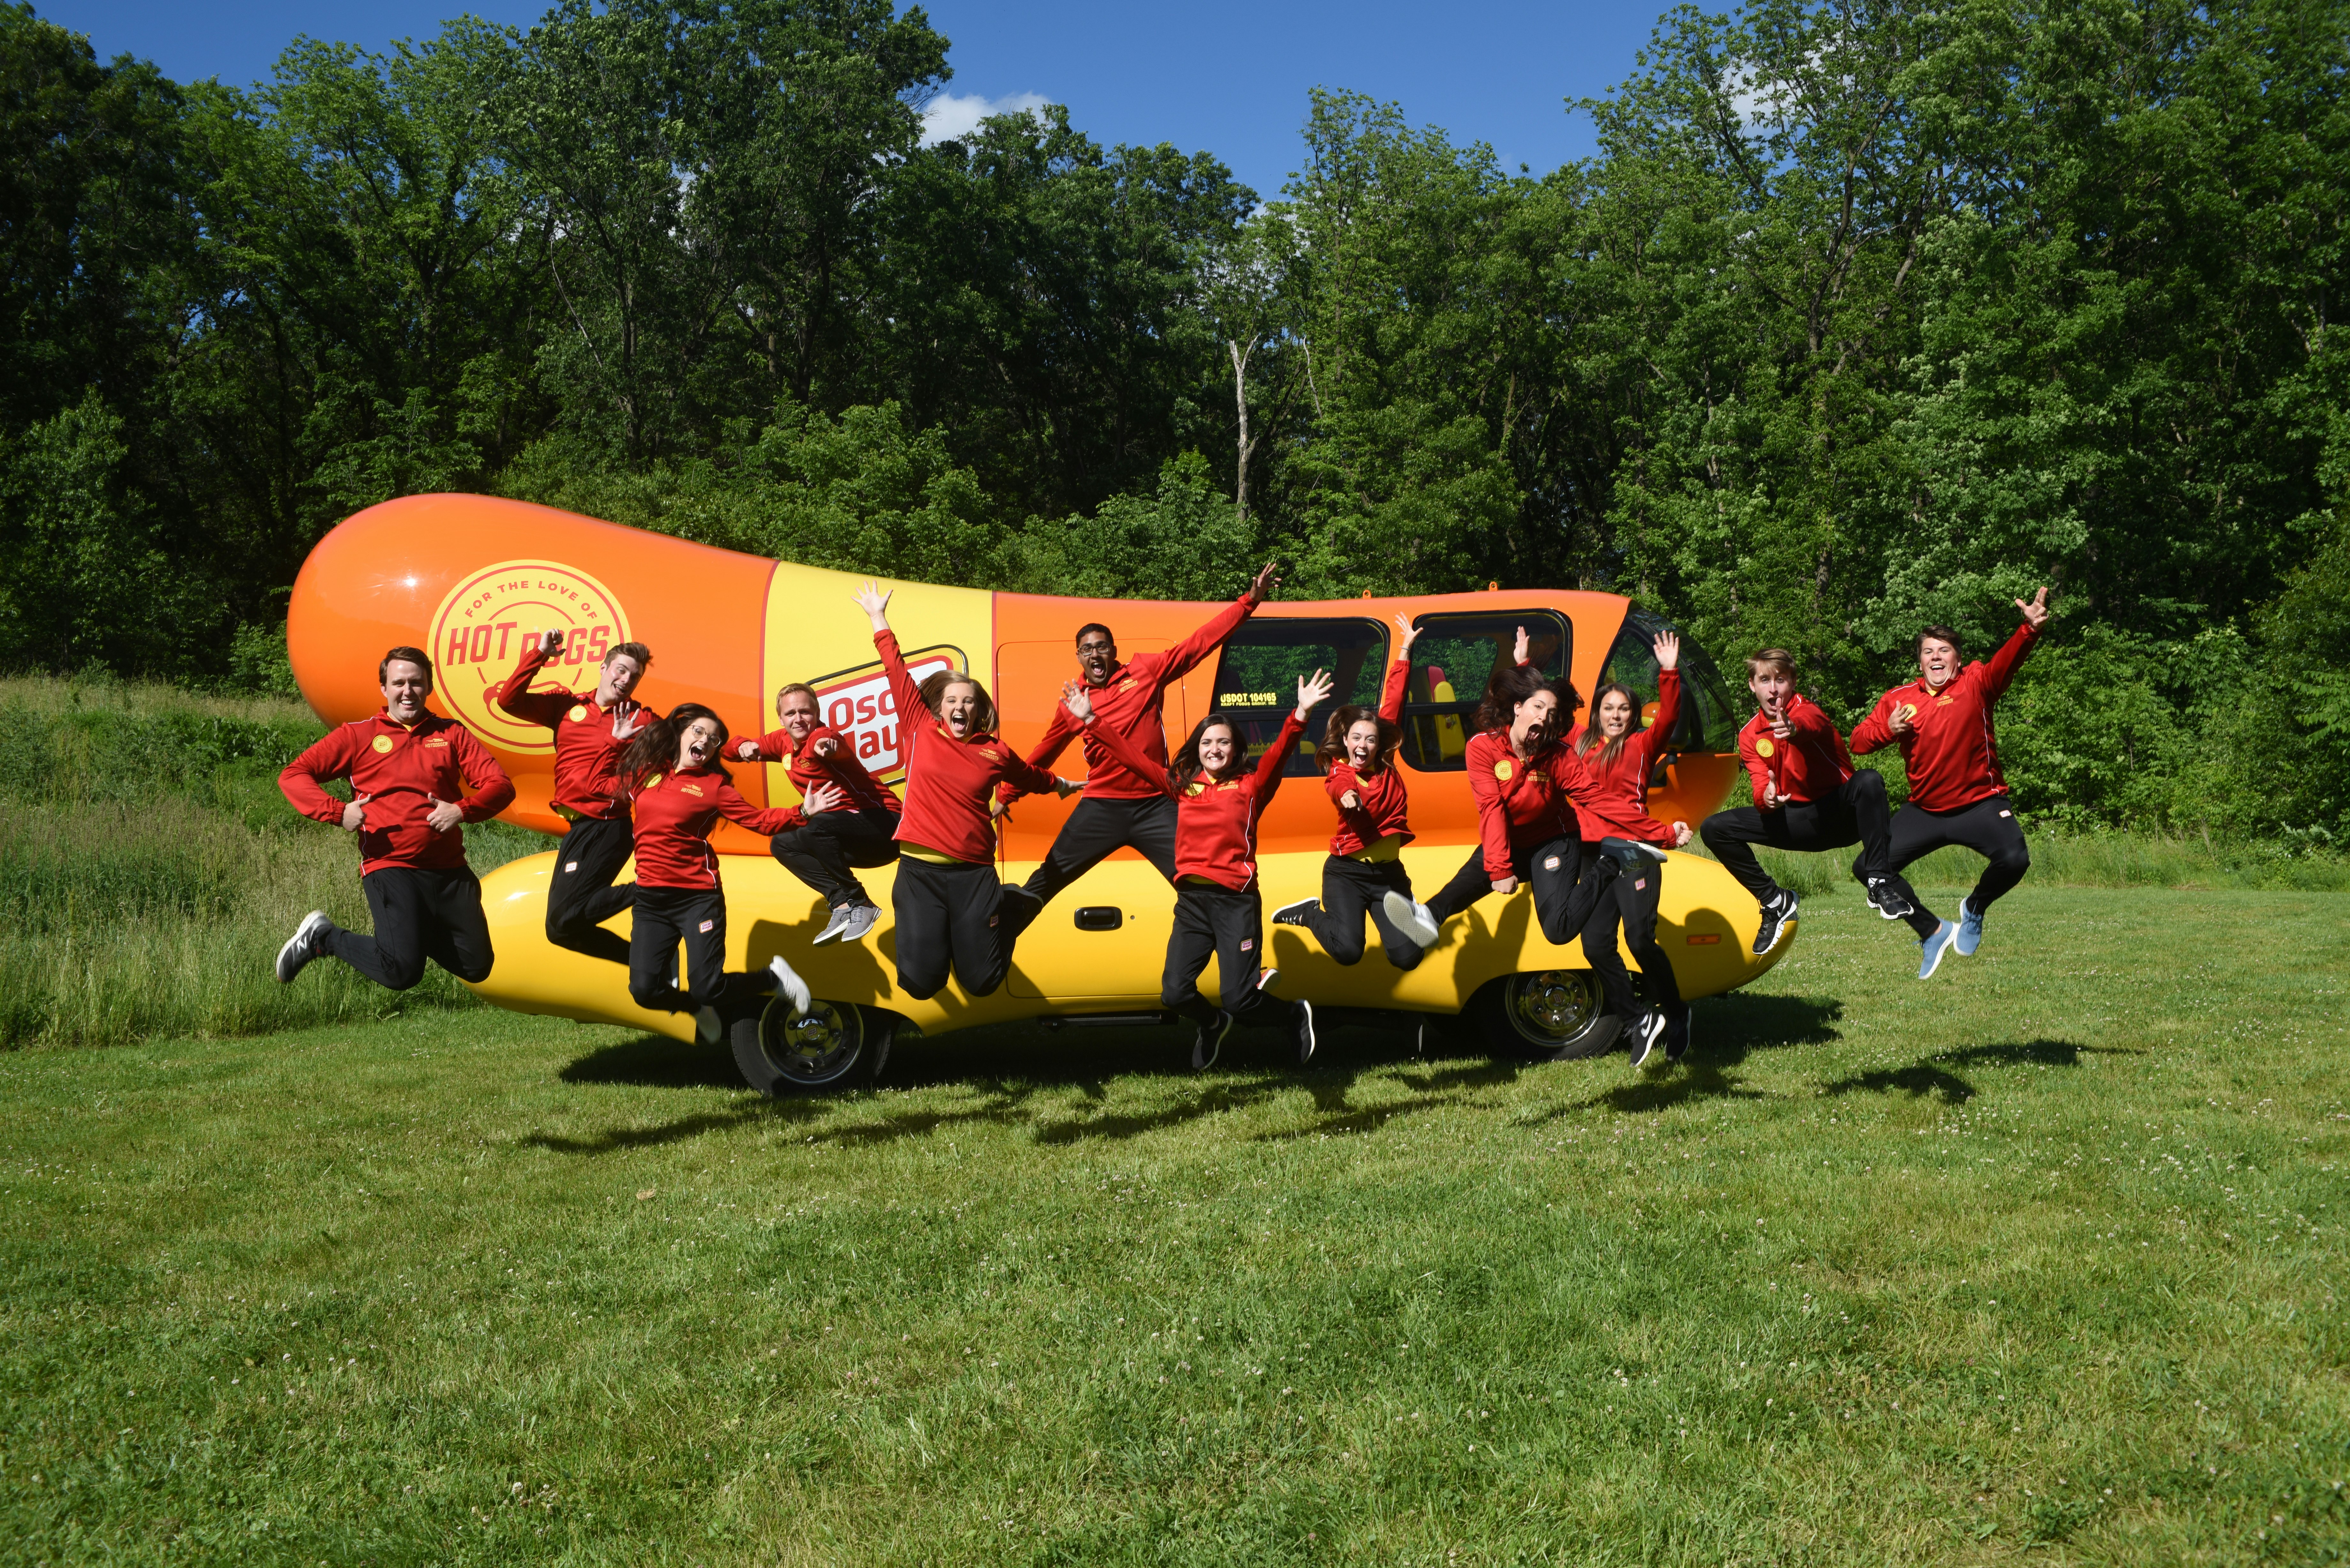 Oscar Mayer's 2019 Hotdoggers, wearing red shirts and black pants, jumping in front of the Wienermobile